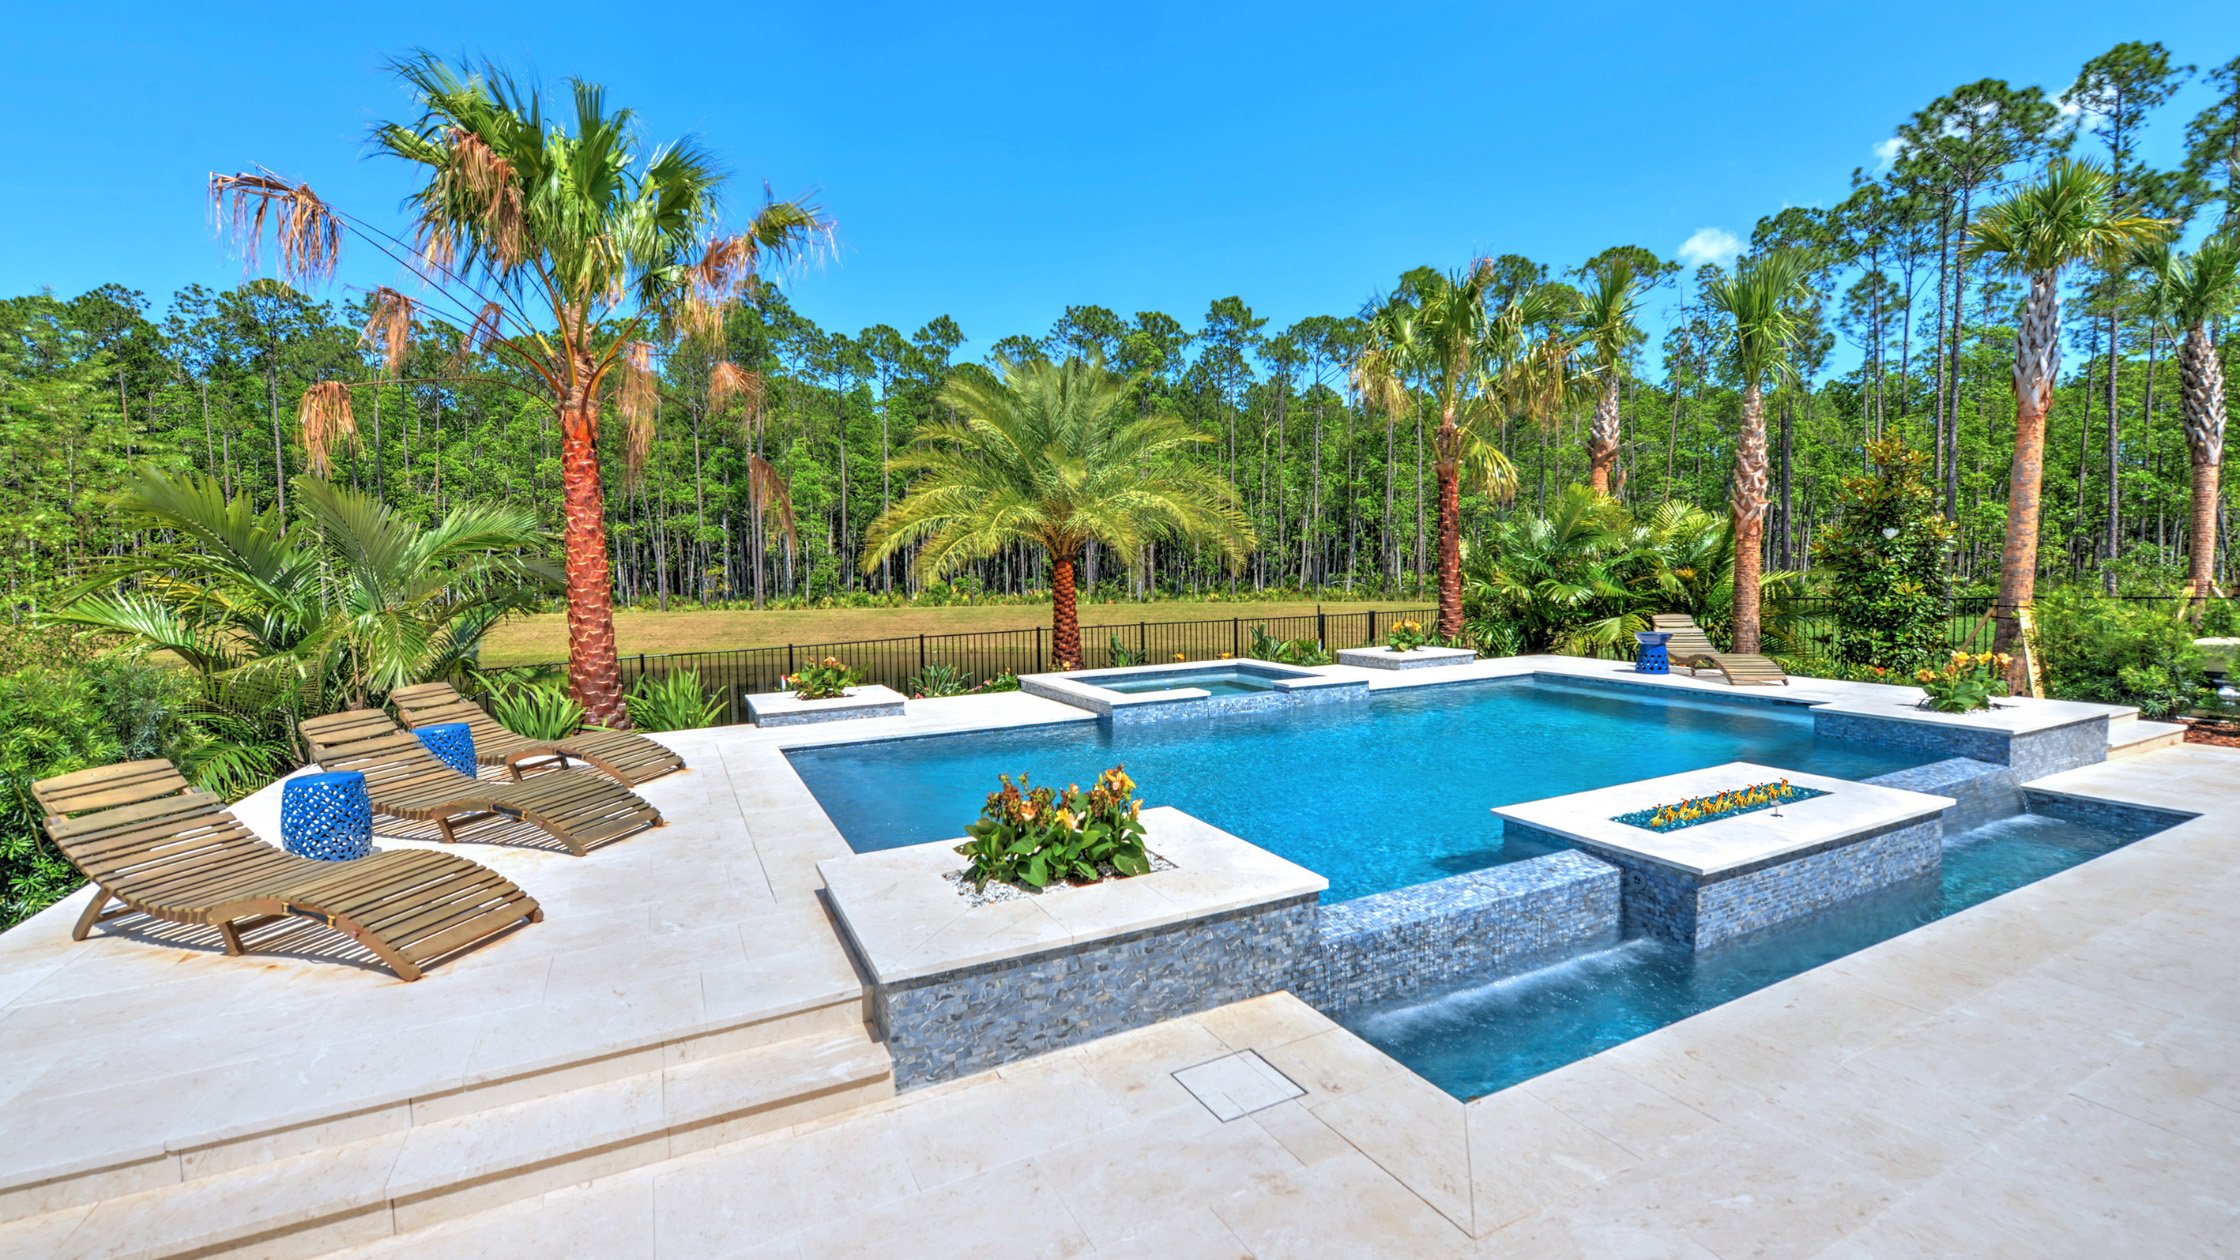 Pools in ICI Homes Model Homes